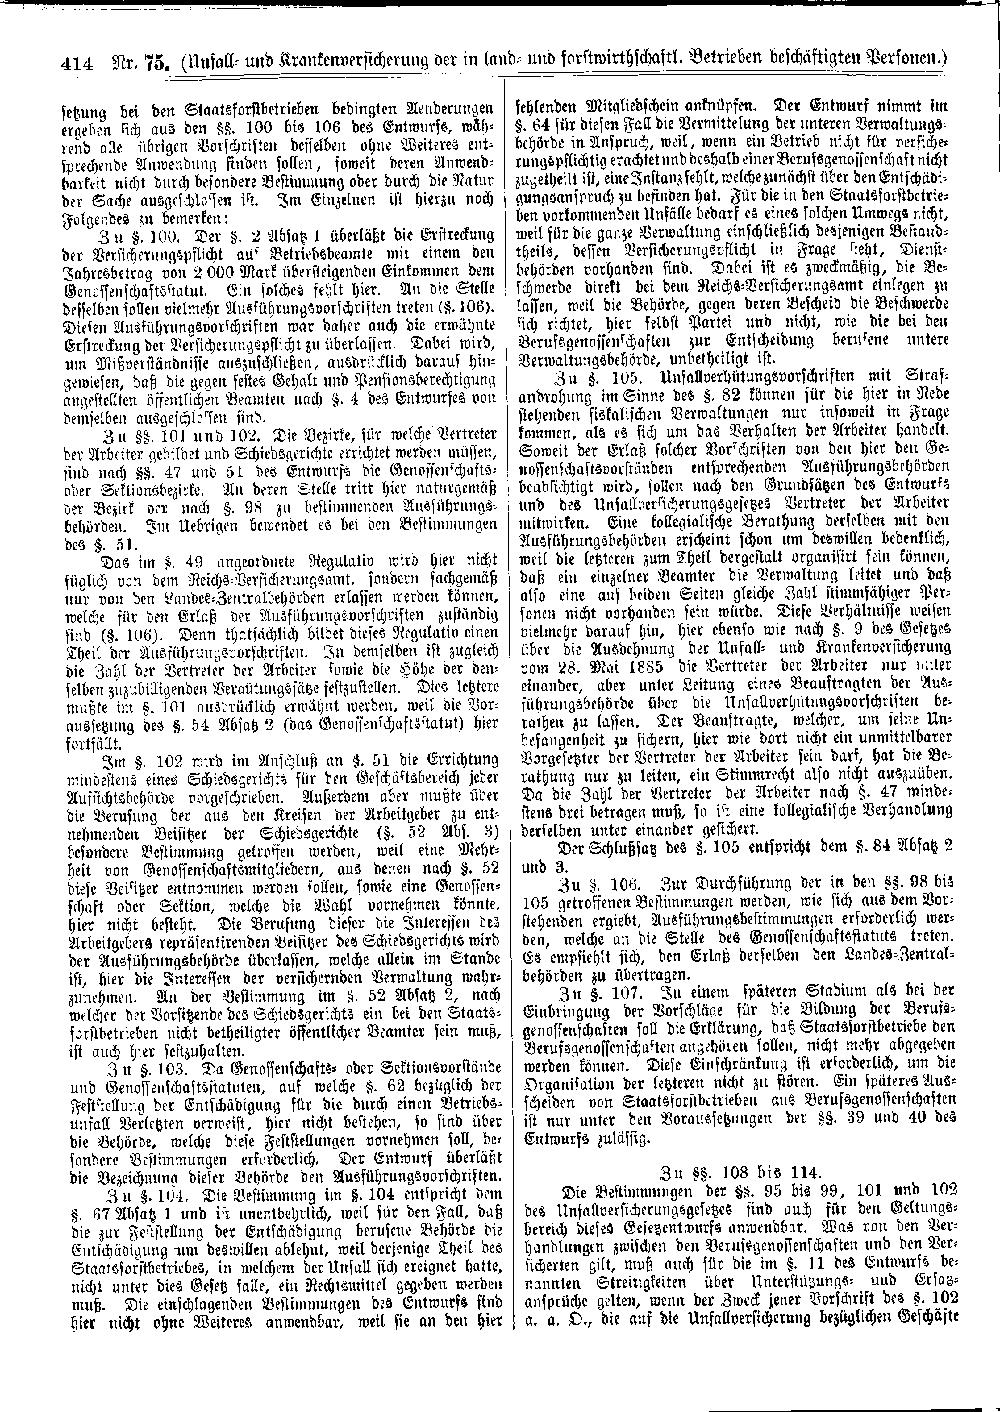 Scan of page 414